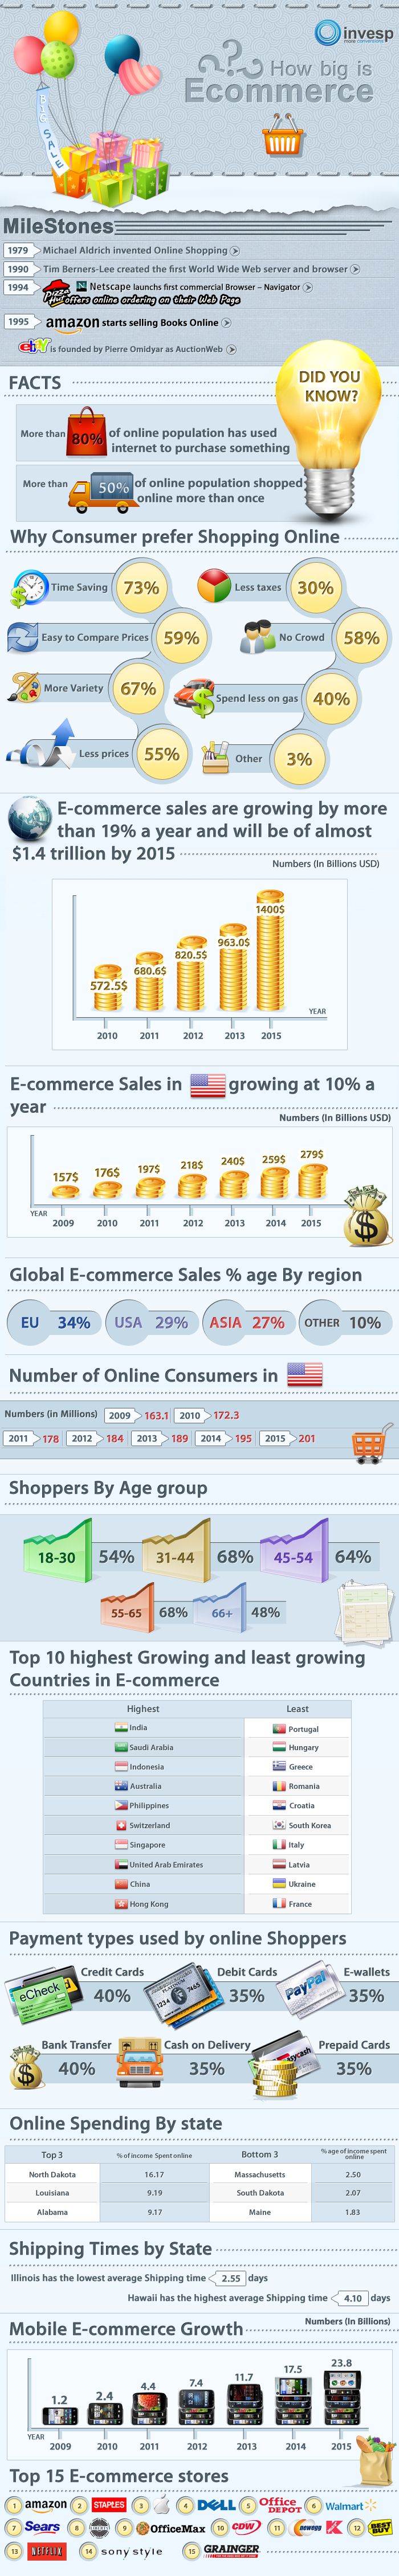 How-big-is-ecommerce-infographic